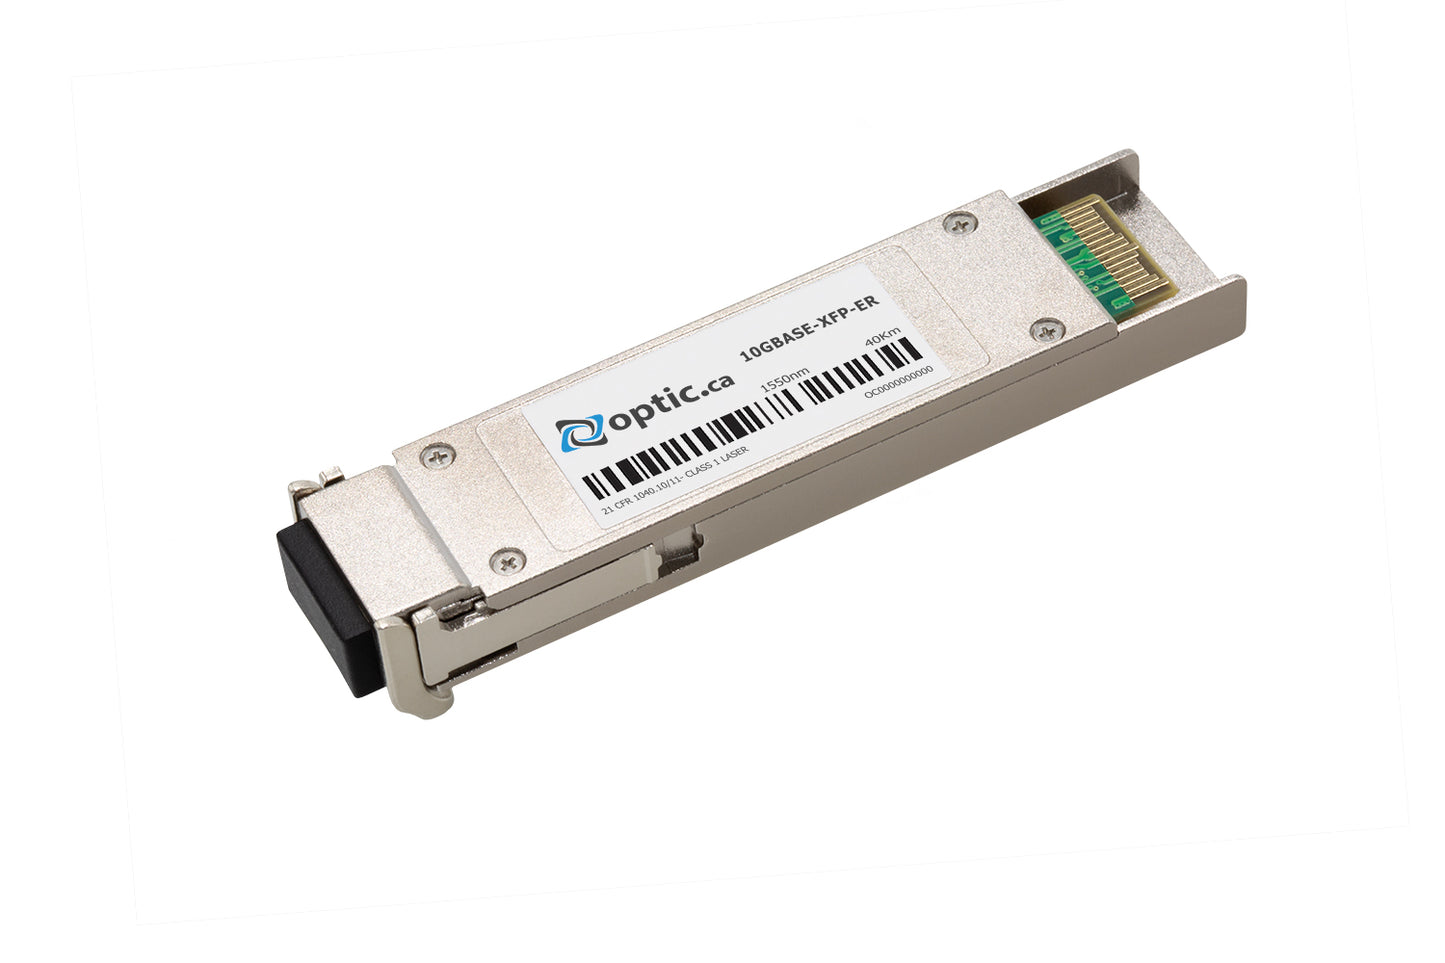 OPTIC.CA - 10GBASE-ER XFP - XFP-10GE-S40K-OC - ZTE COMPATIBLE